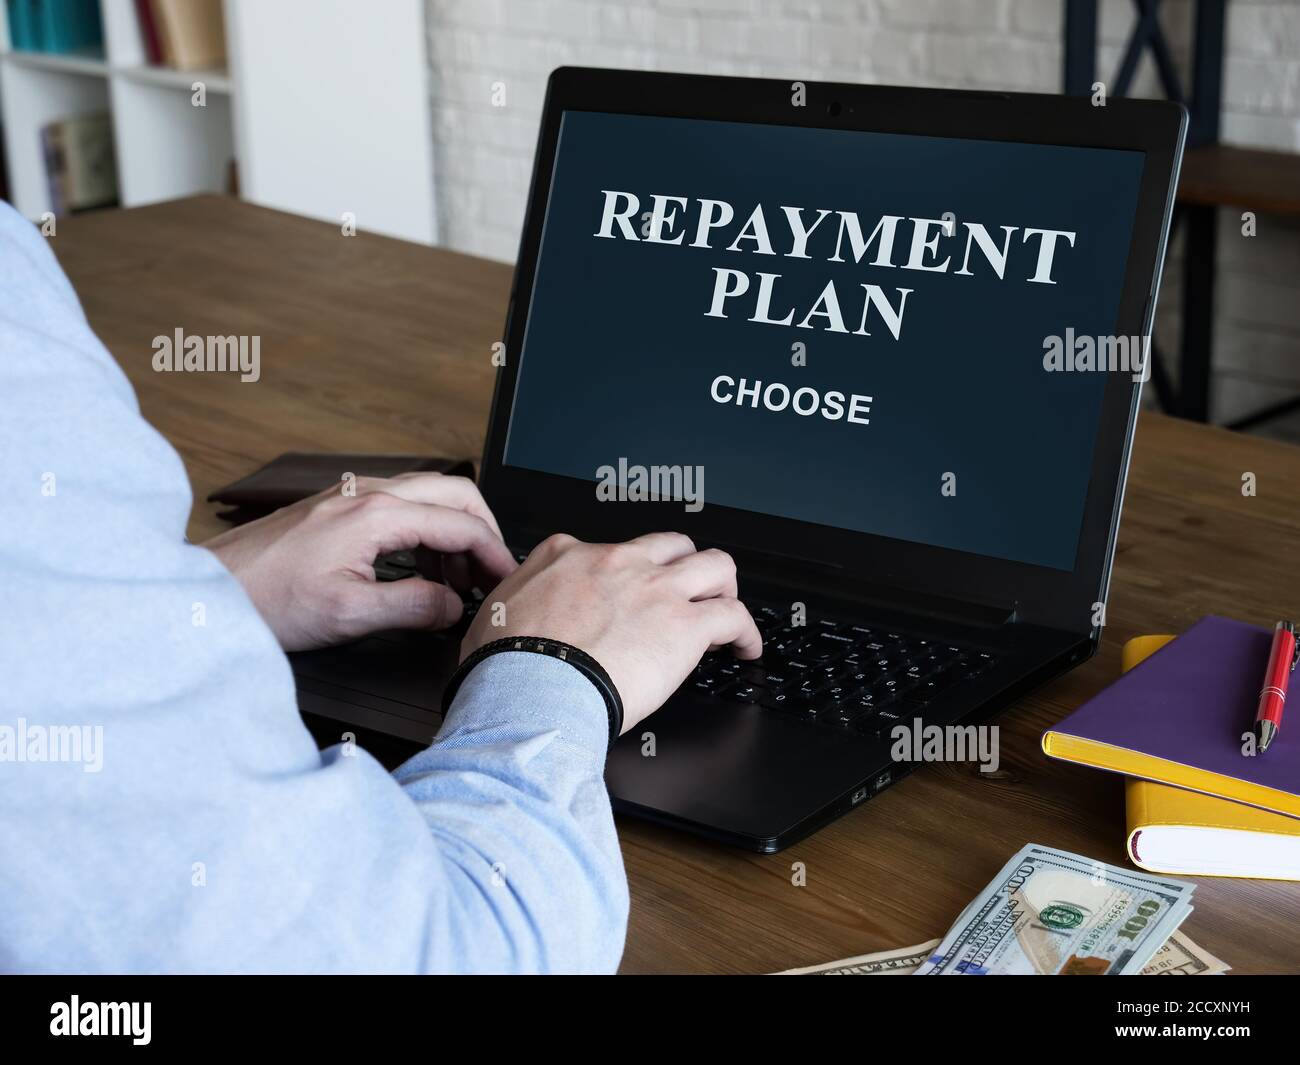 The man reads about loan repayment plan and chooses. Stock Photo